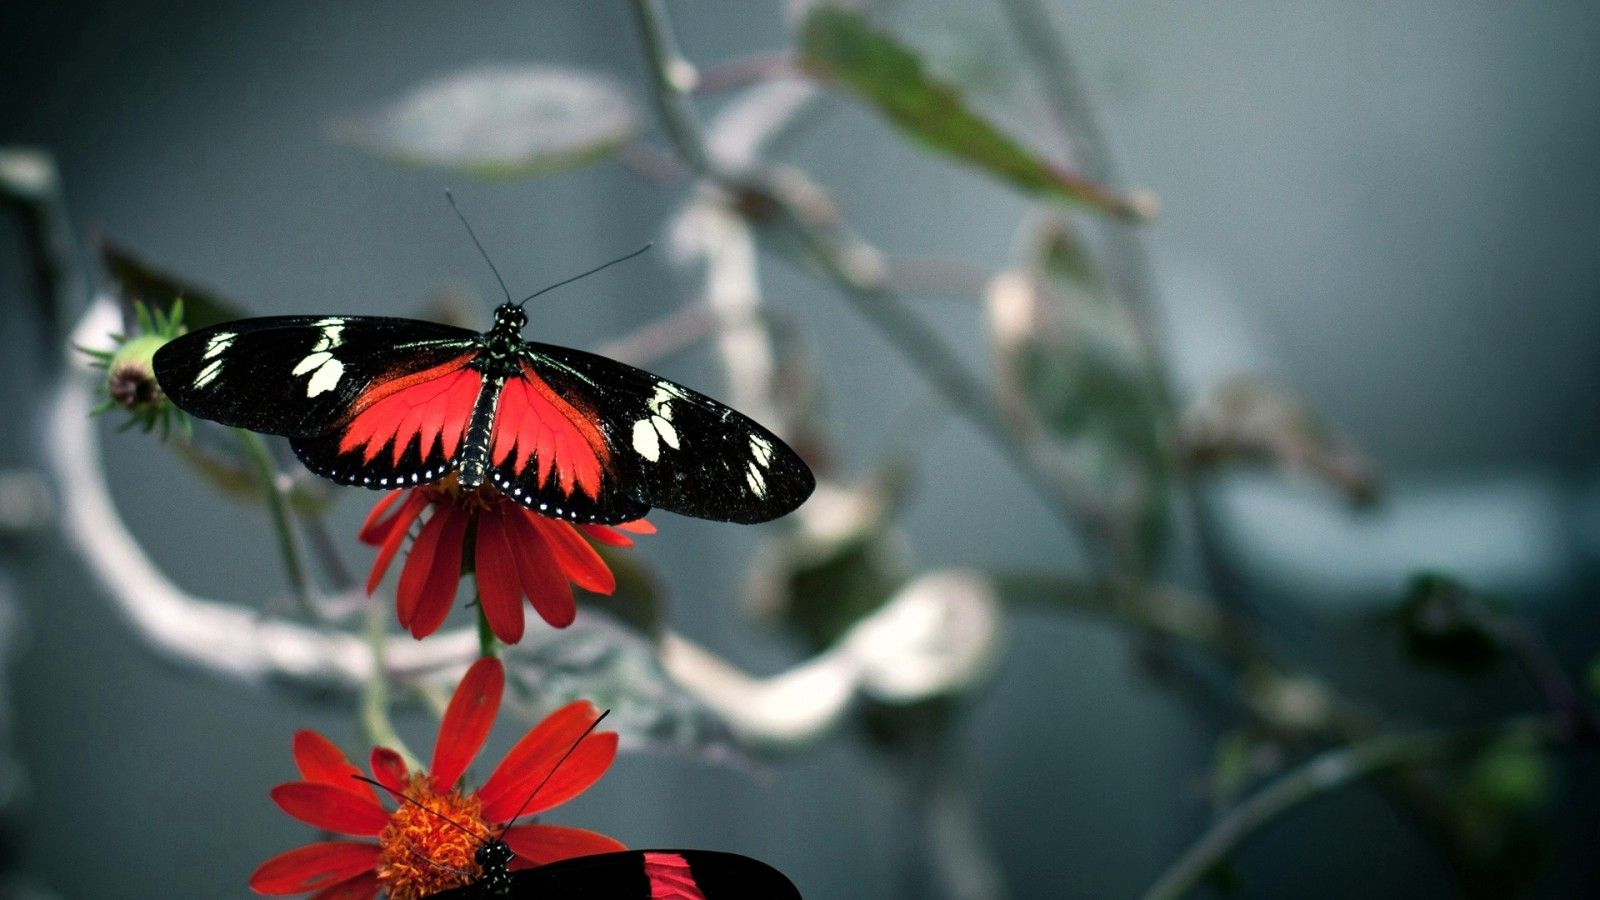 Red Butterfly Wallpapers